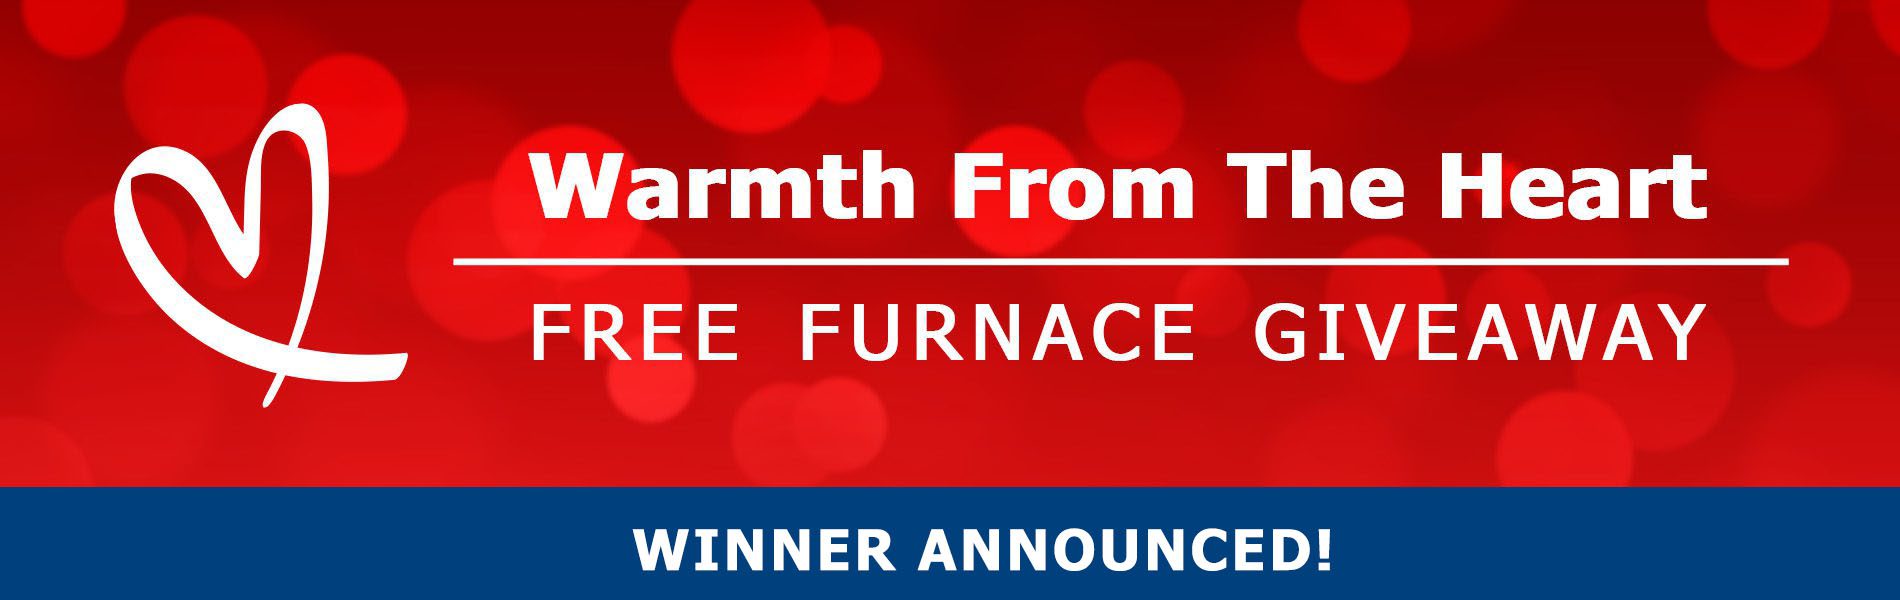 Warmth from the Heart Winner Announced | Trouble Free Inc.